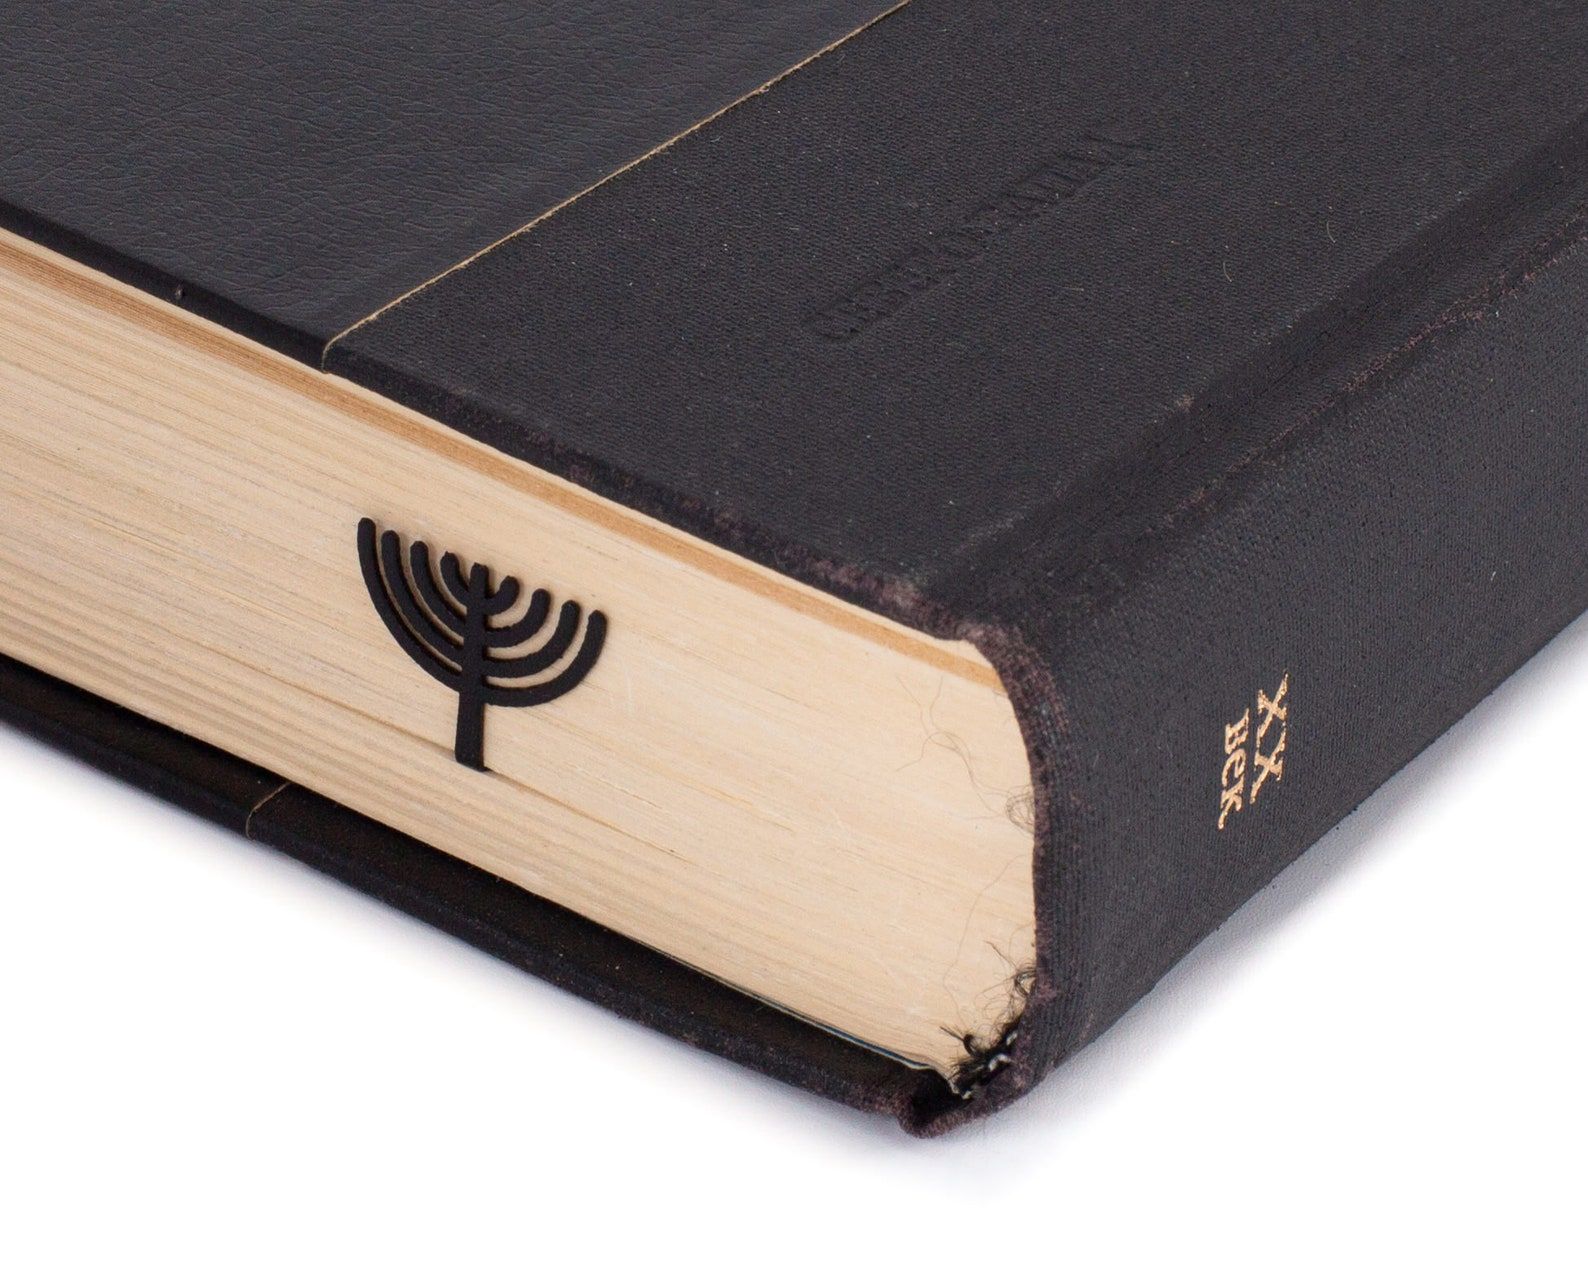 A hardcover book with a dark metal bookmark peeking out, and a menorah against the pages.